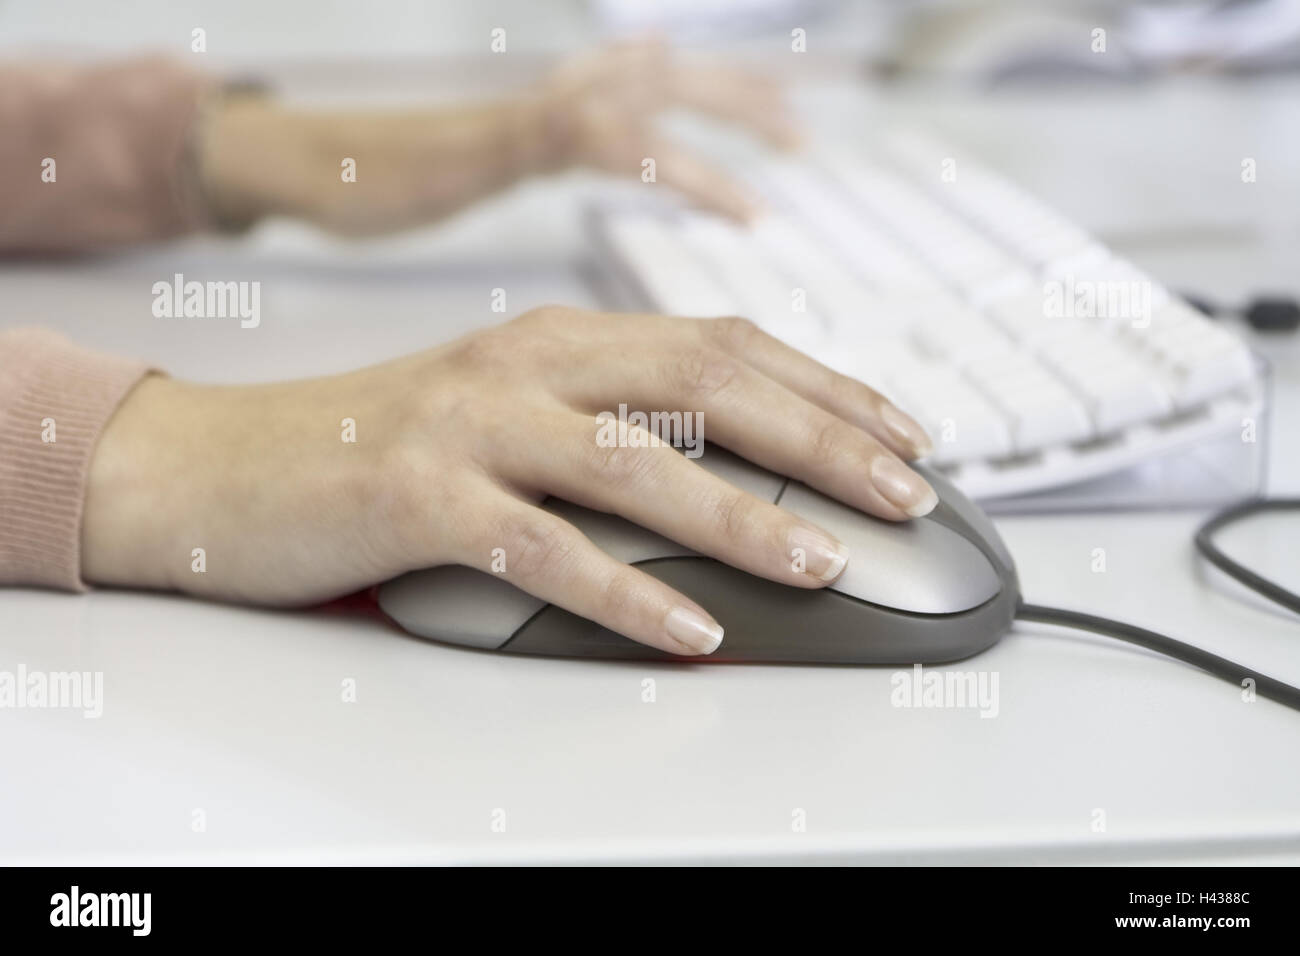 Women's hands, keyboard, data entry, Mouse, detail, Stock Photo